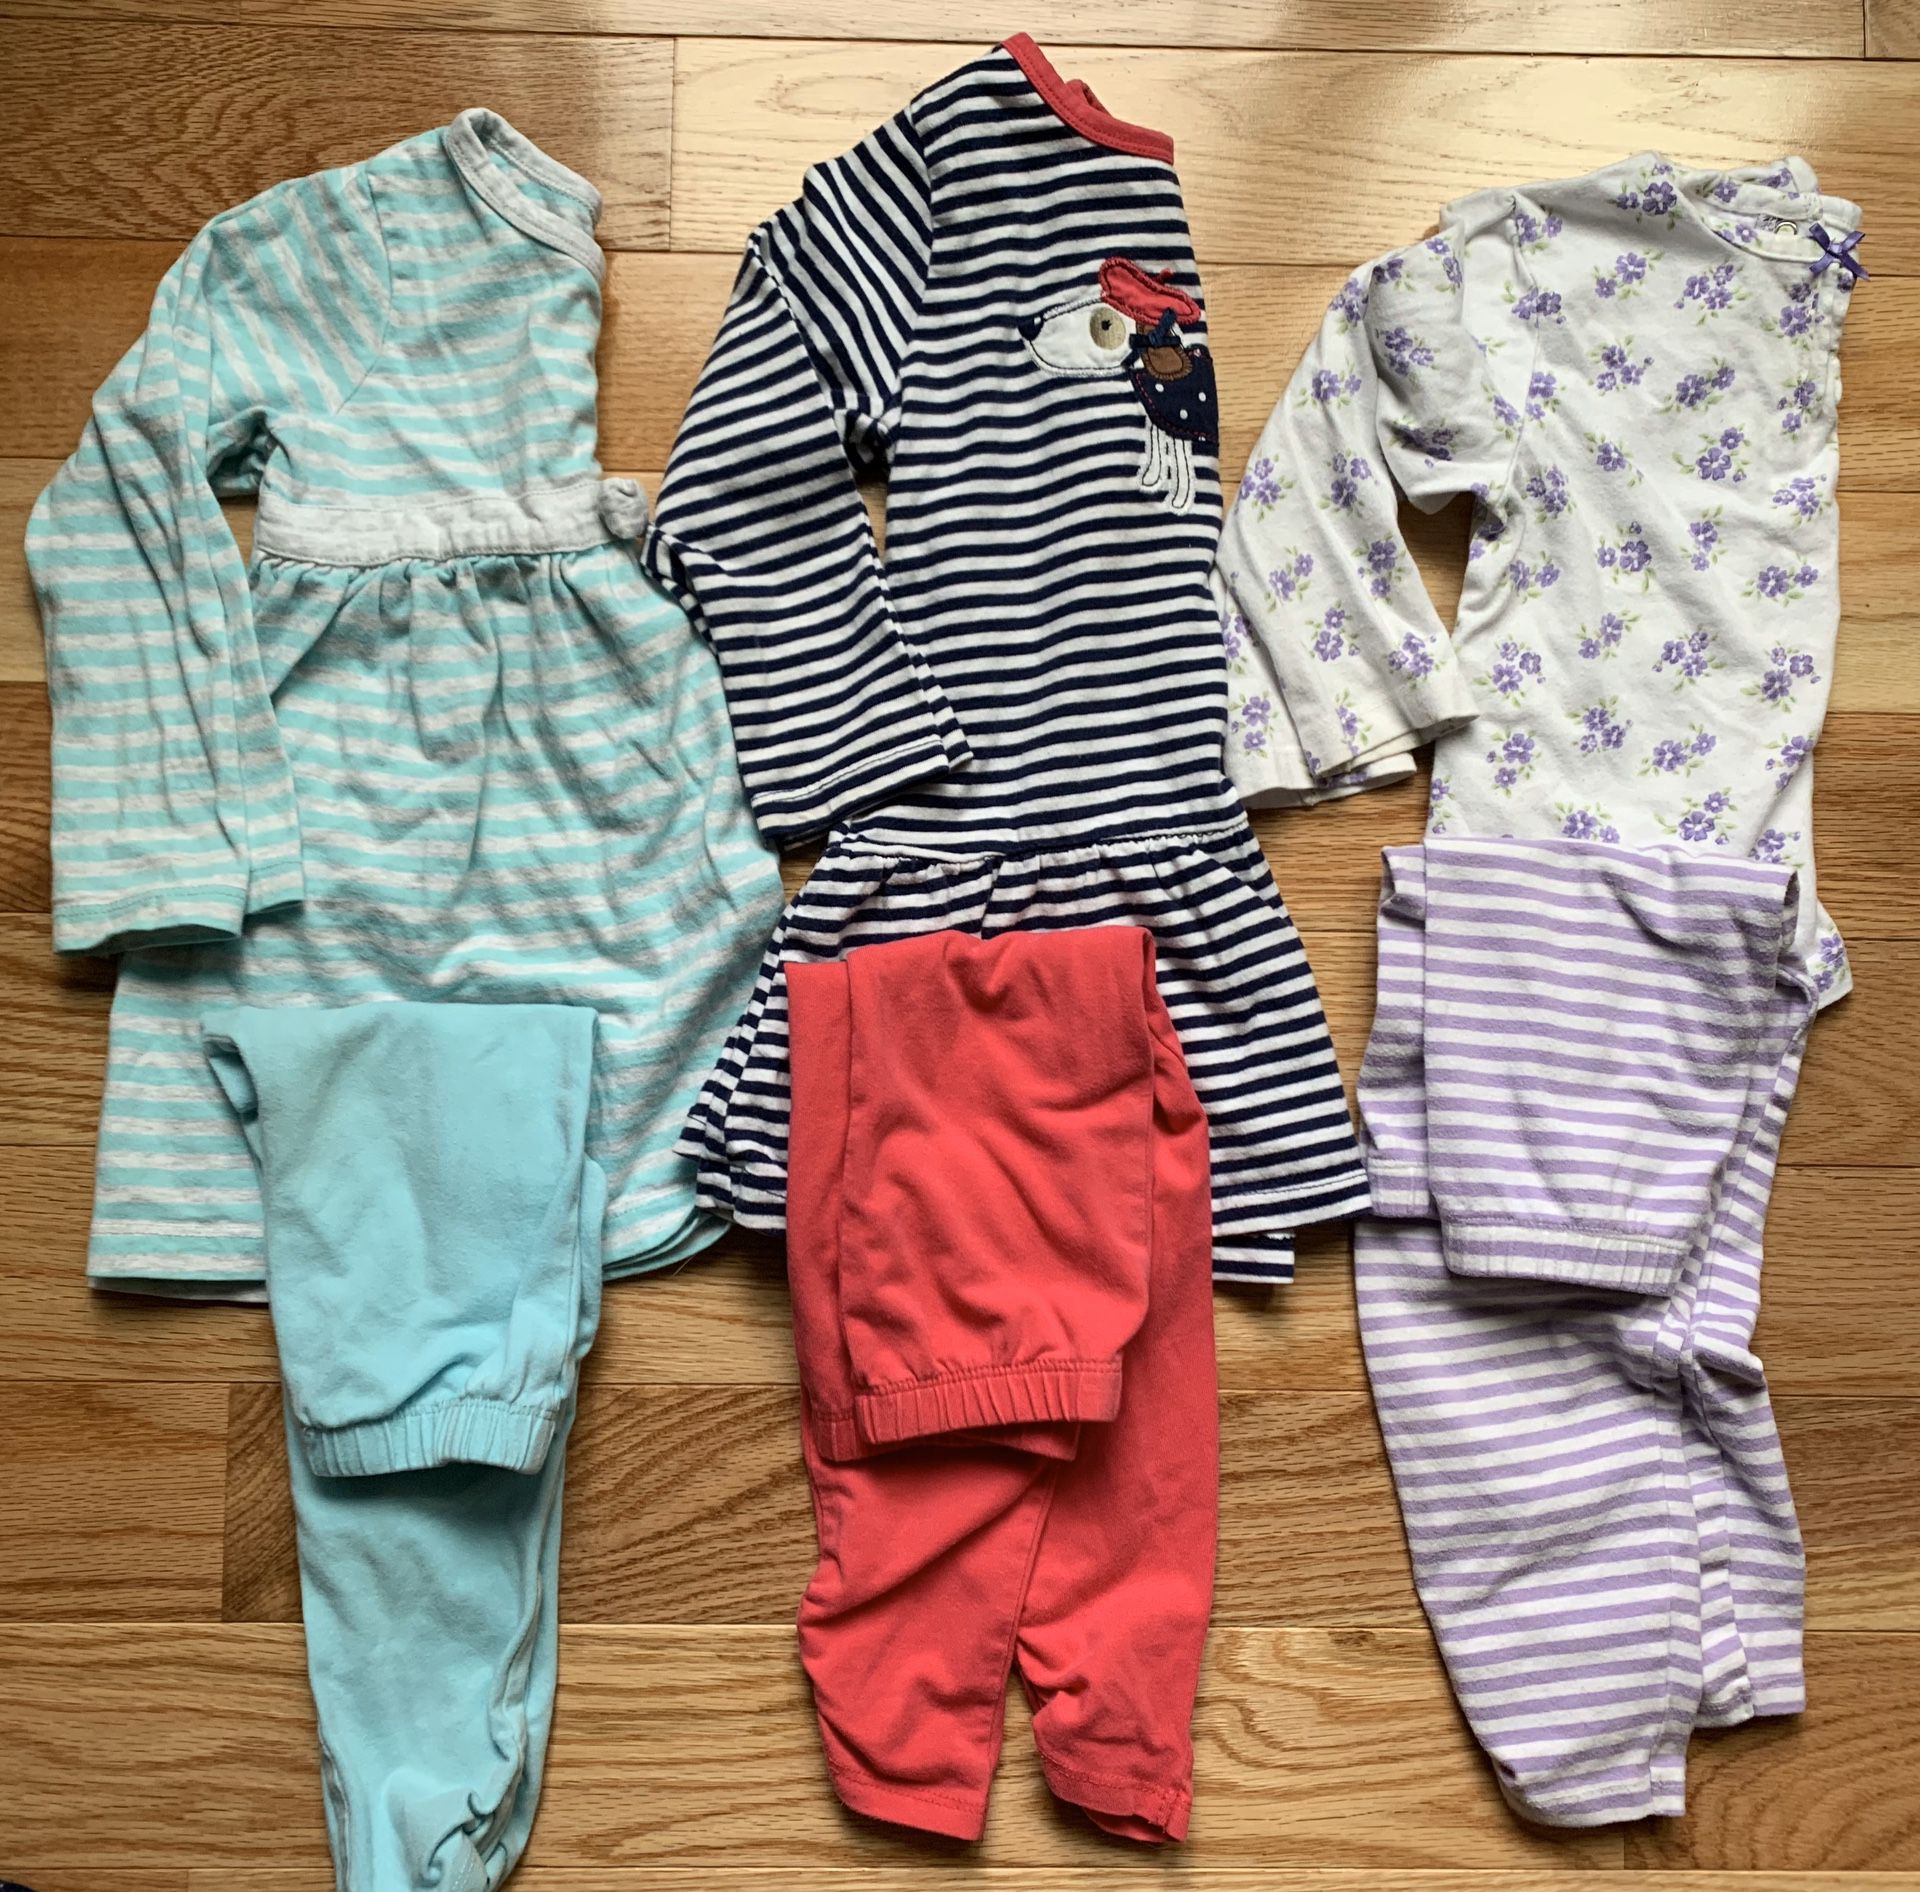 3T Toddler girl outfits (lot of 5)